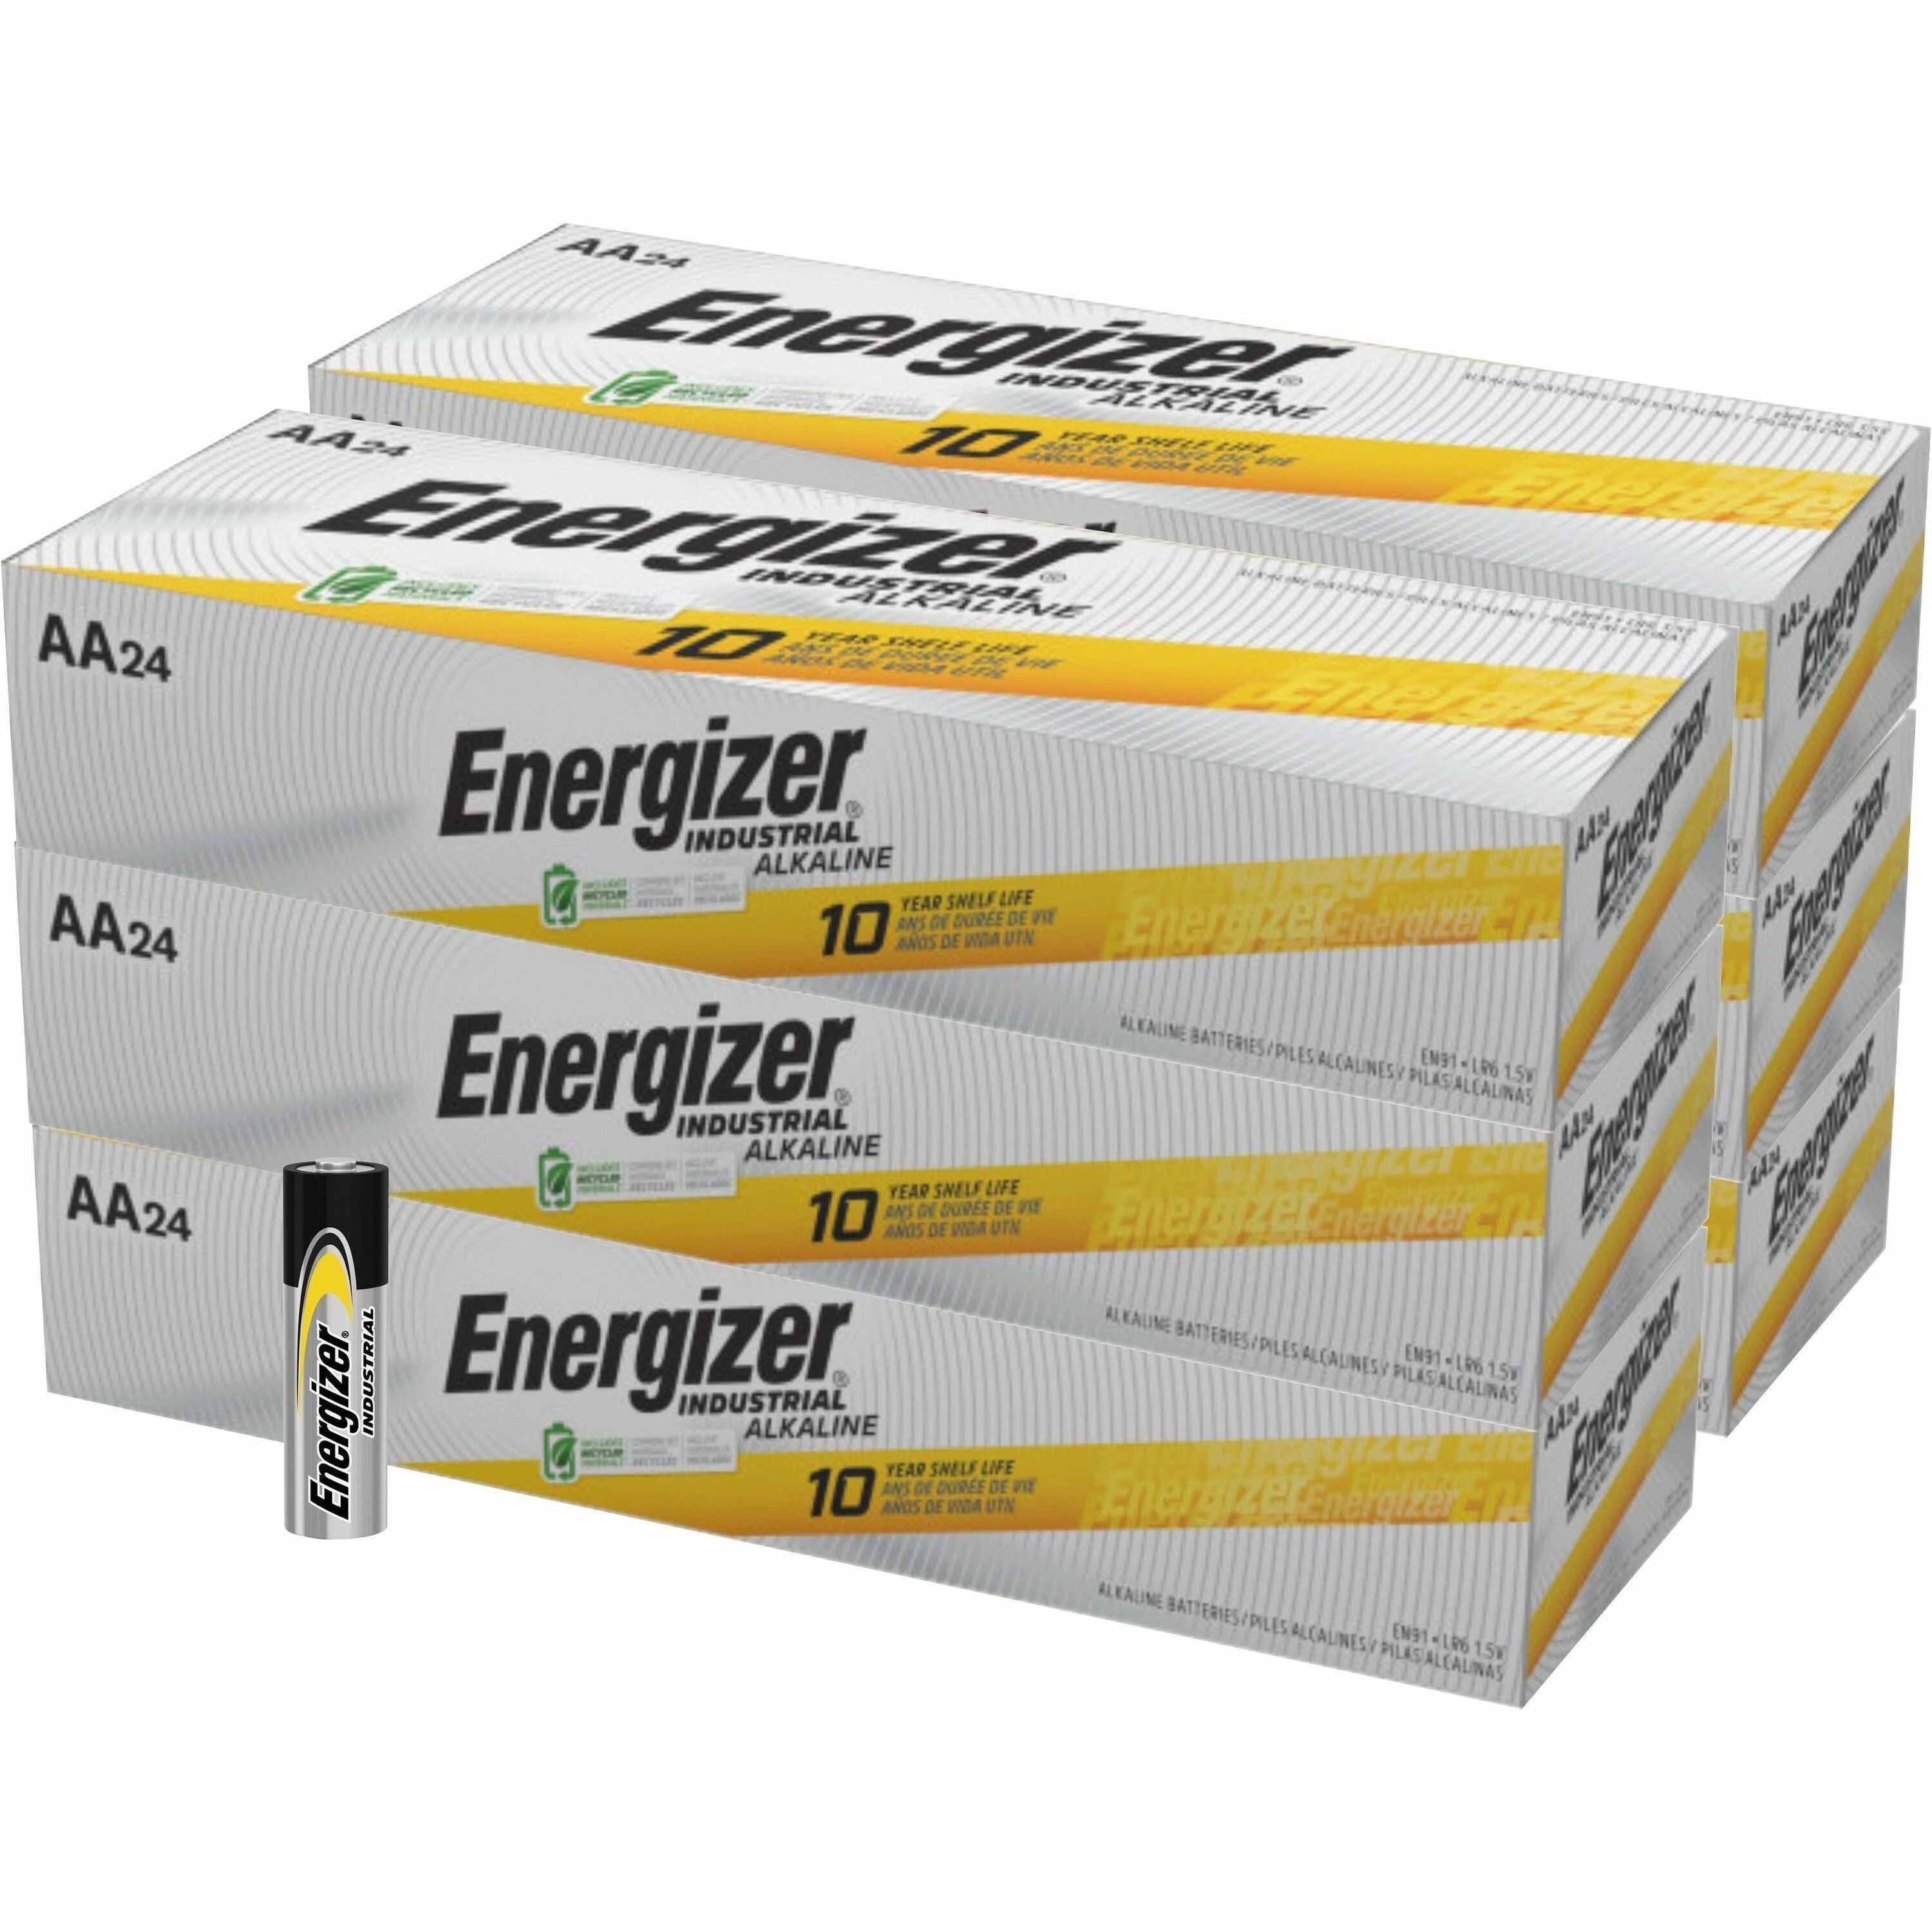 energizer-industrial-alkaline-aa-battery-boxes-of-24-for-multipurpose-aa-15-v-dc-6-carton_eveen91ct - 1